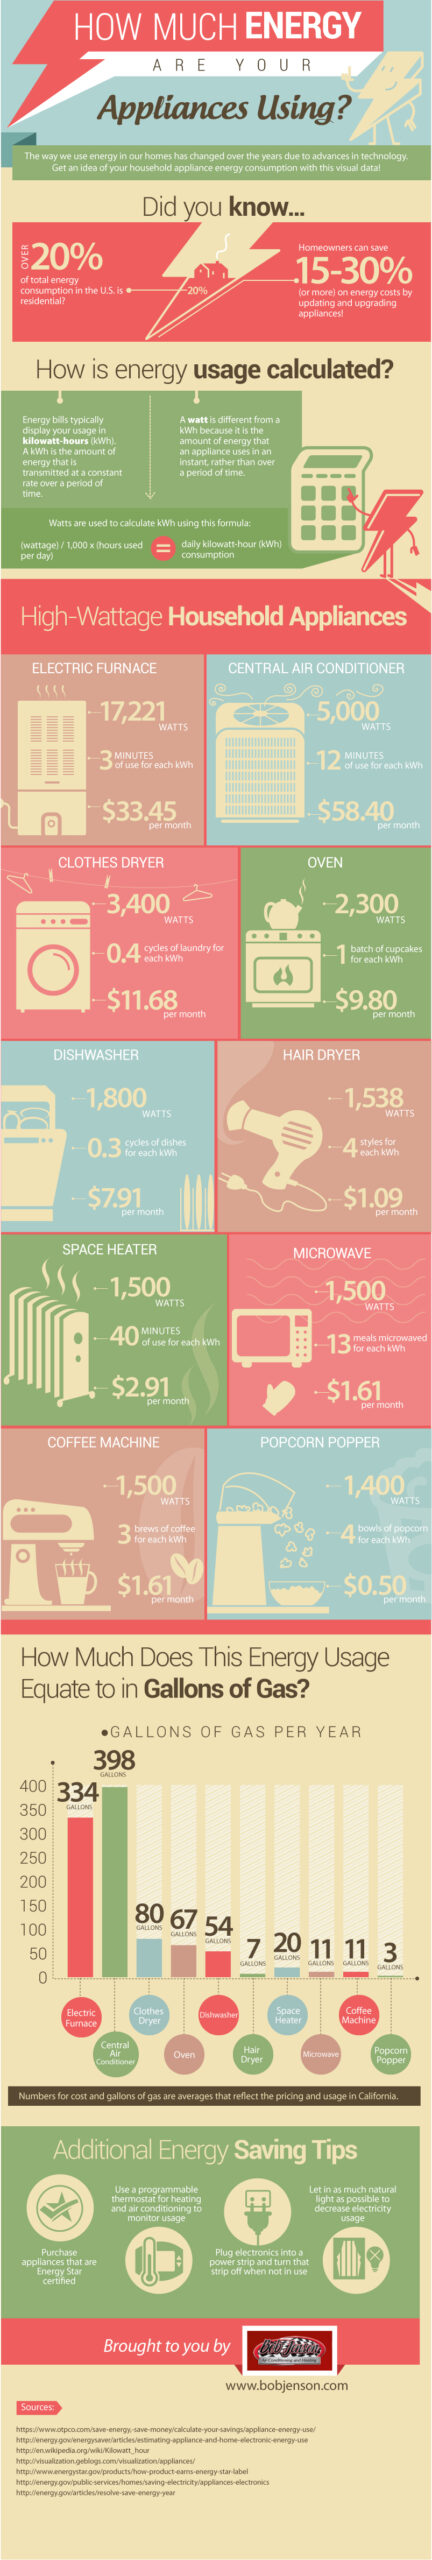 An infographic showing how much energy are your appliances using and which ones use the most